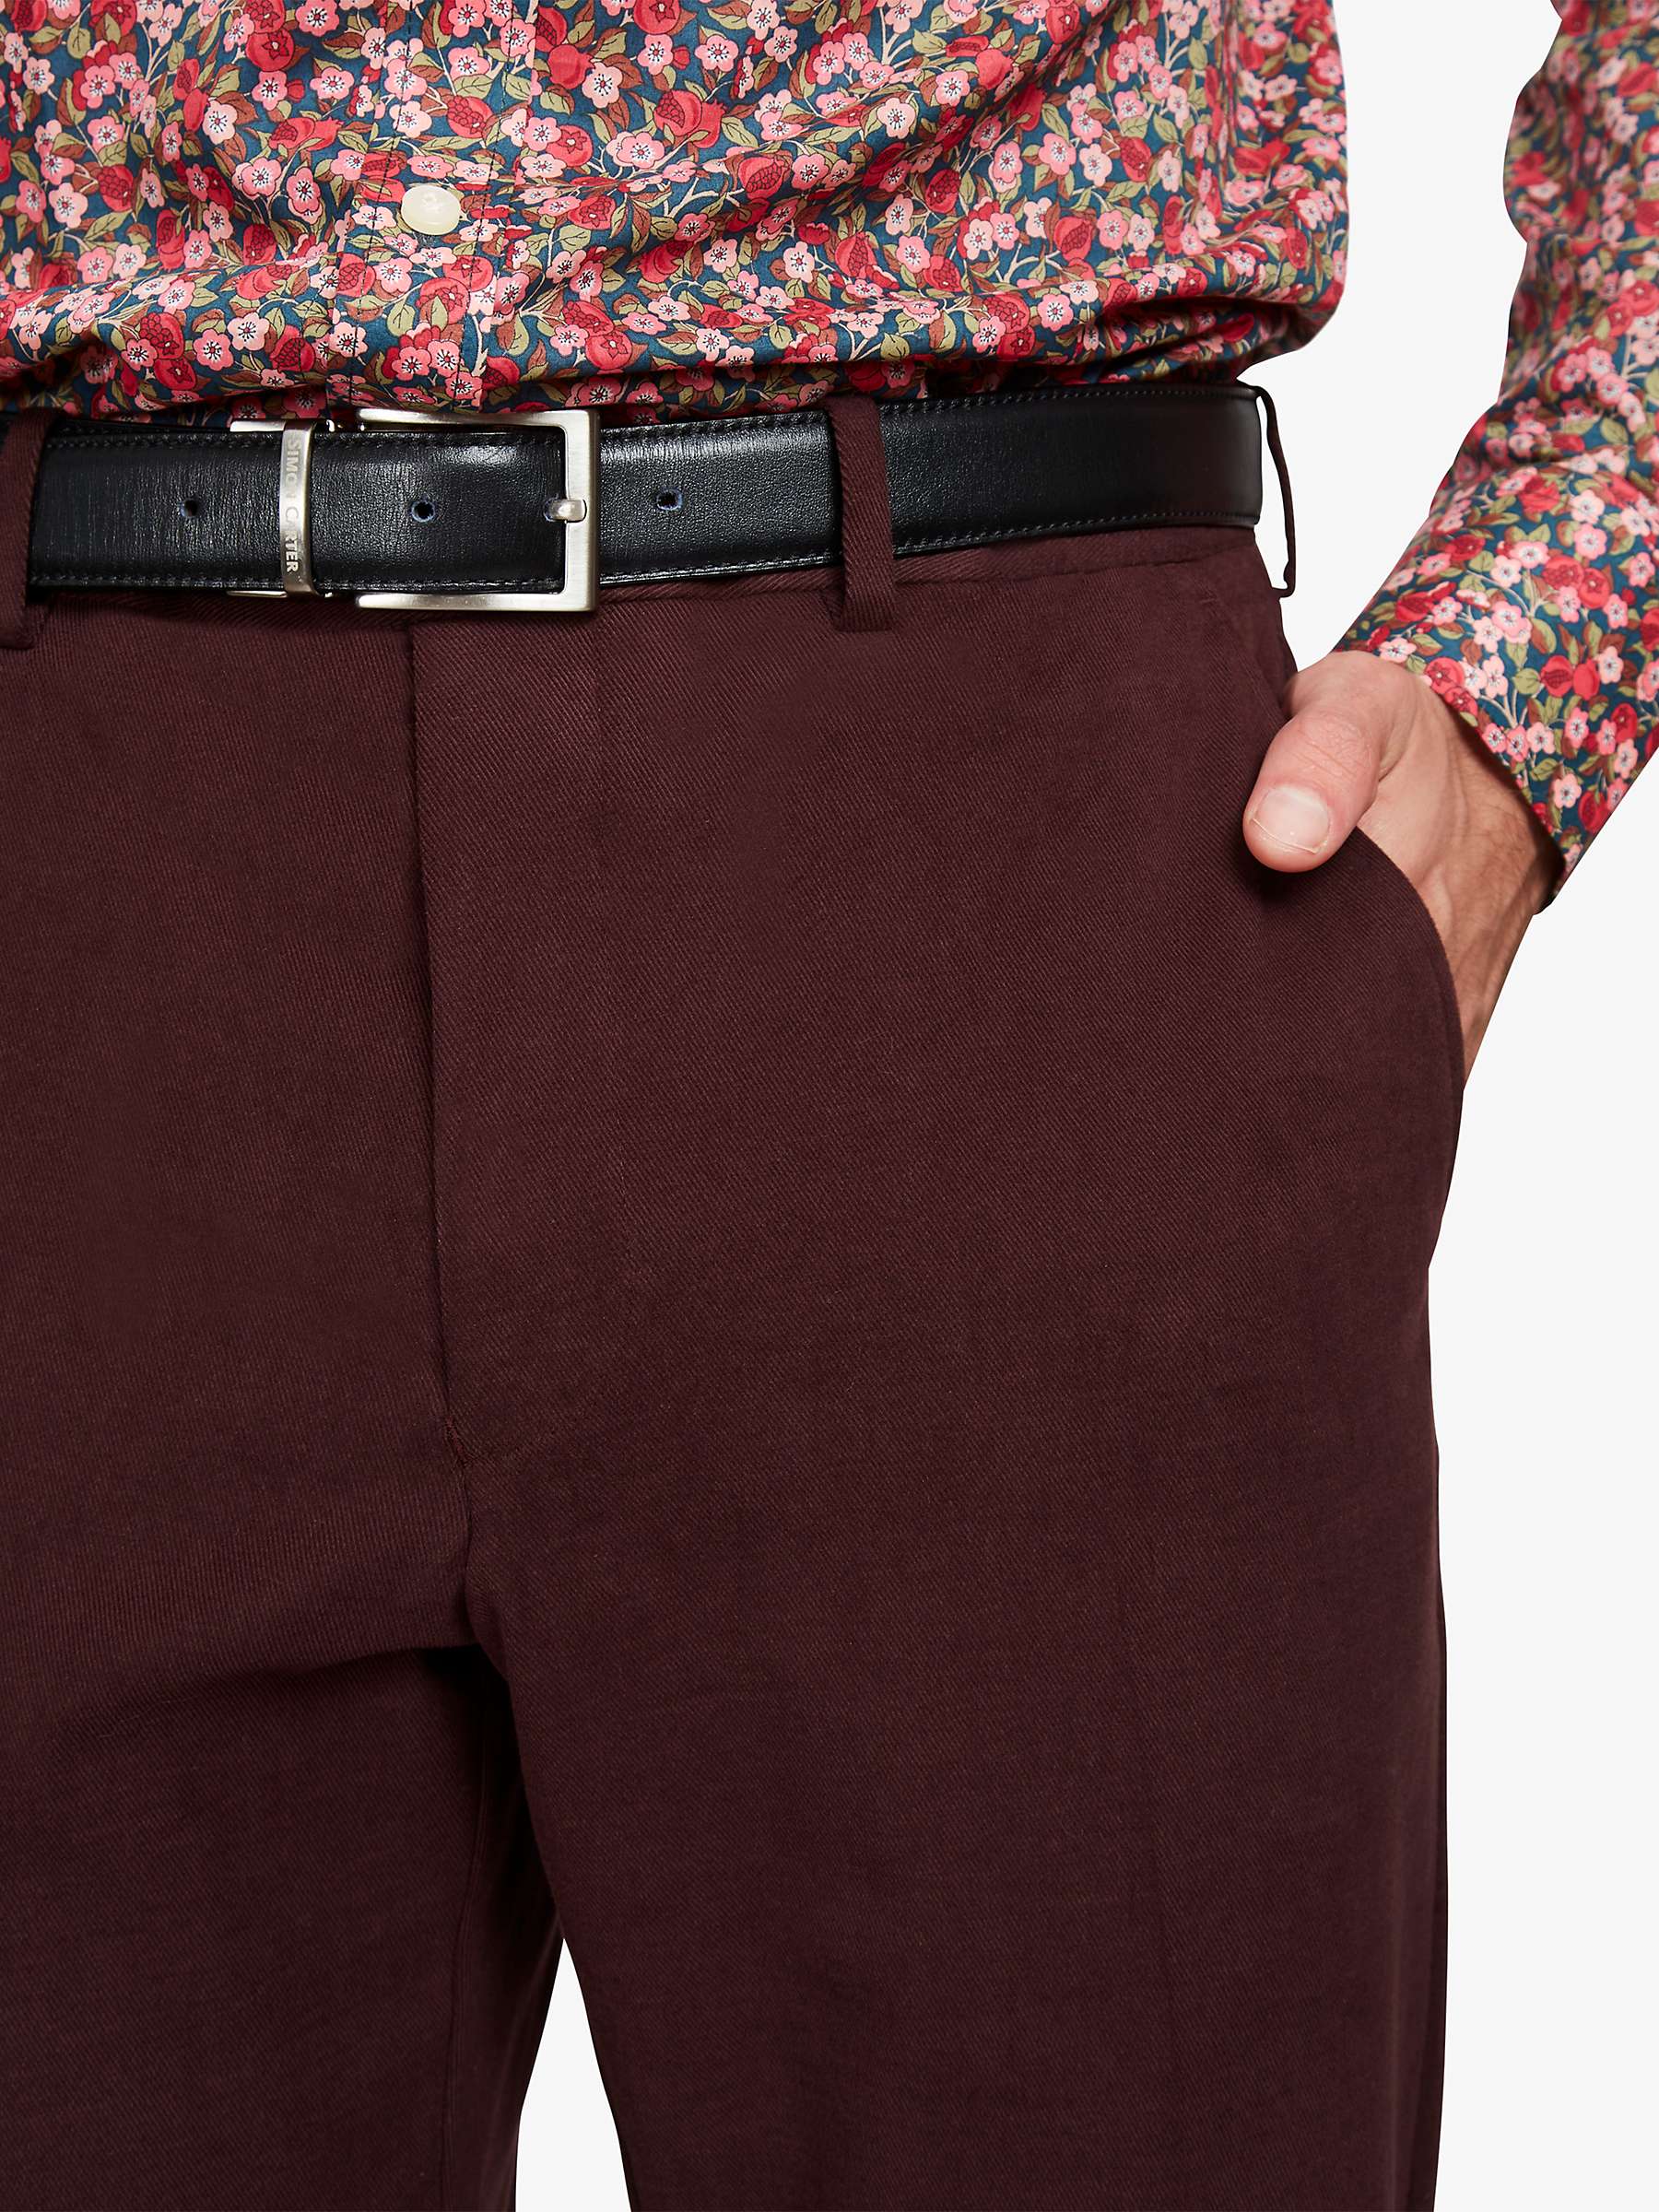 Buy Simon Carter Brushed Cotton Trousers Online at johnlewis.com